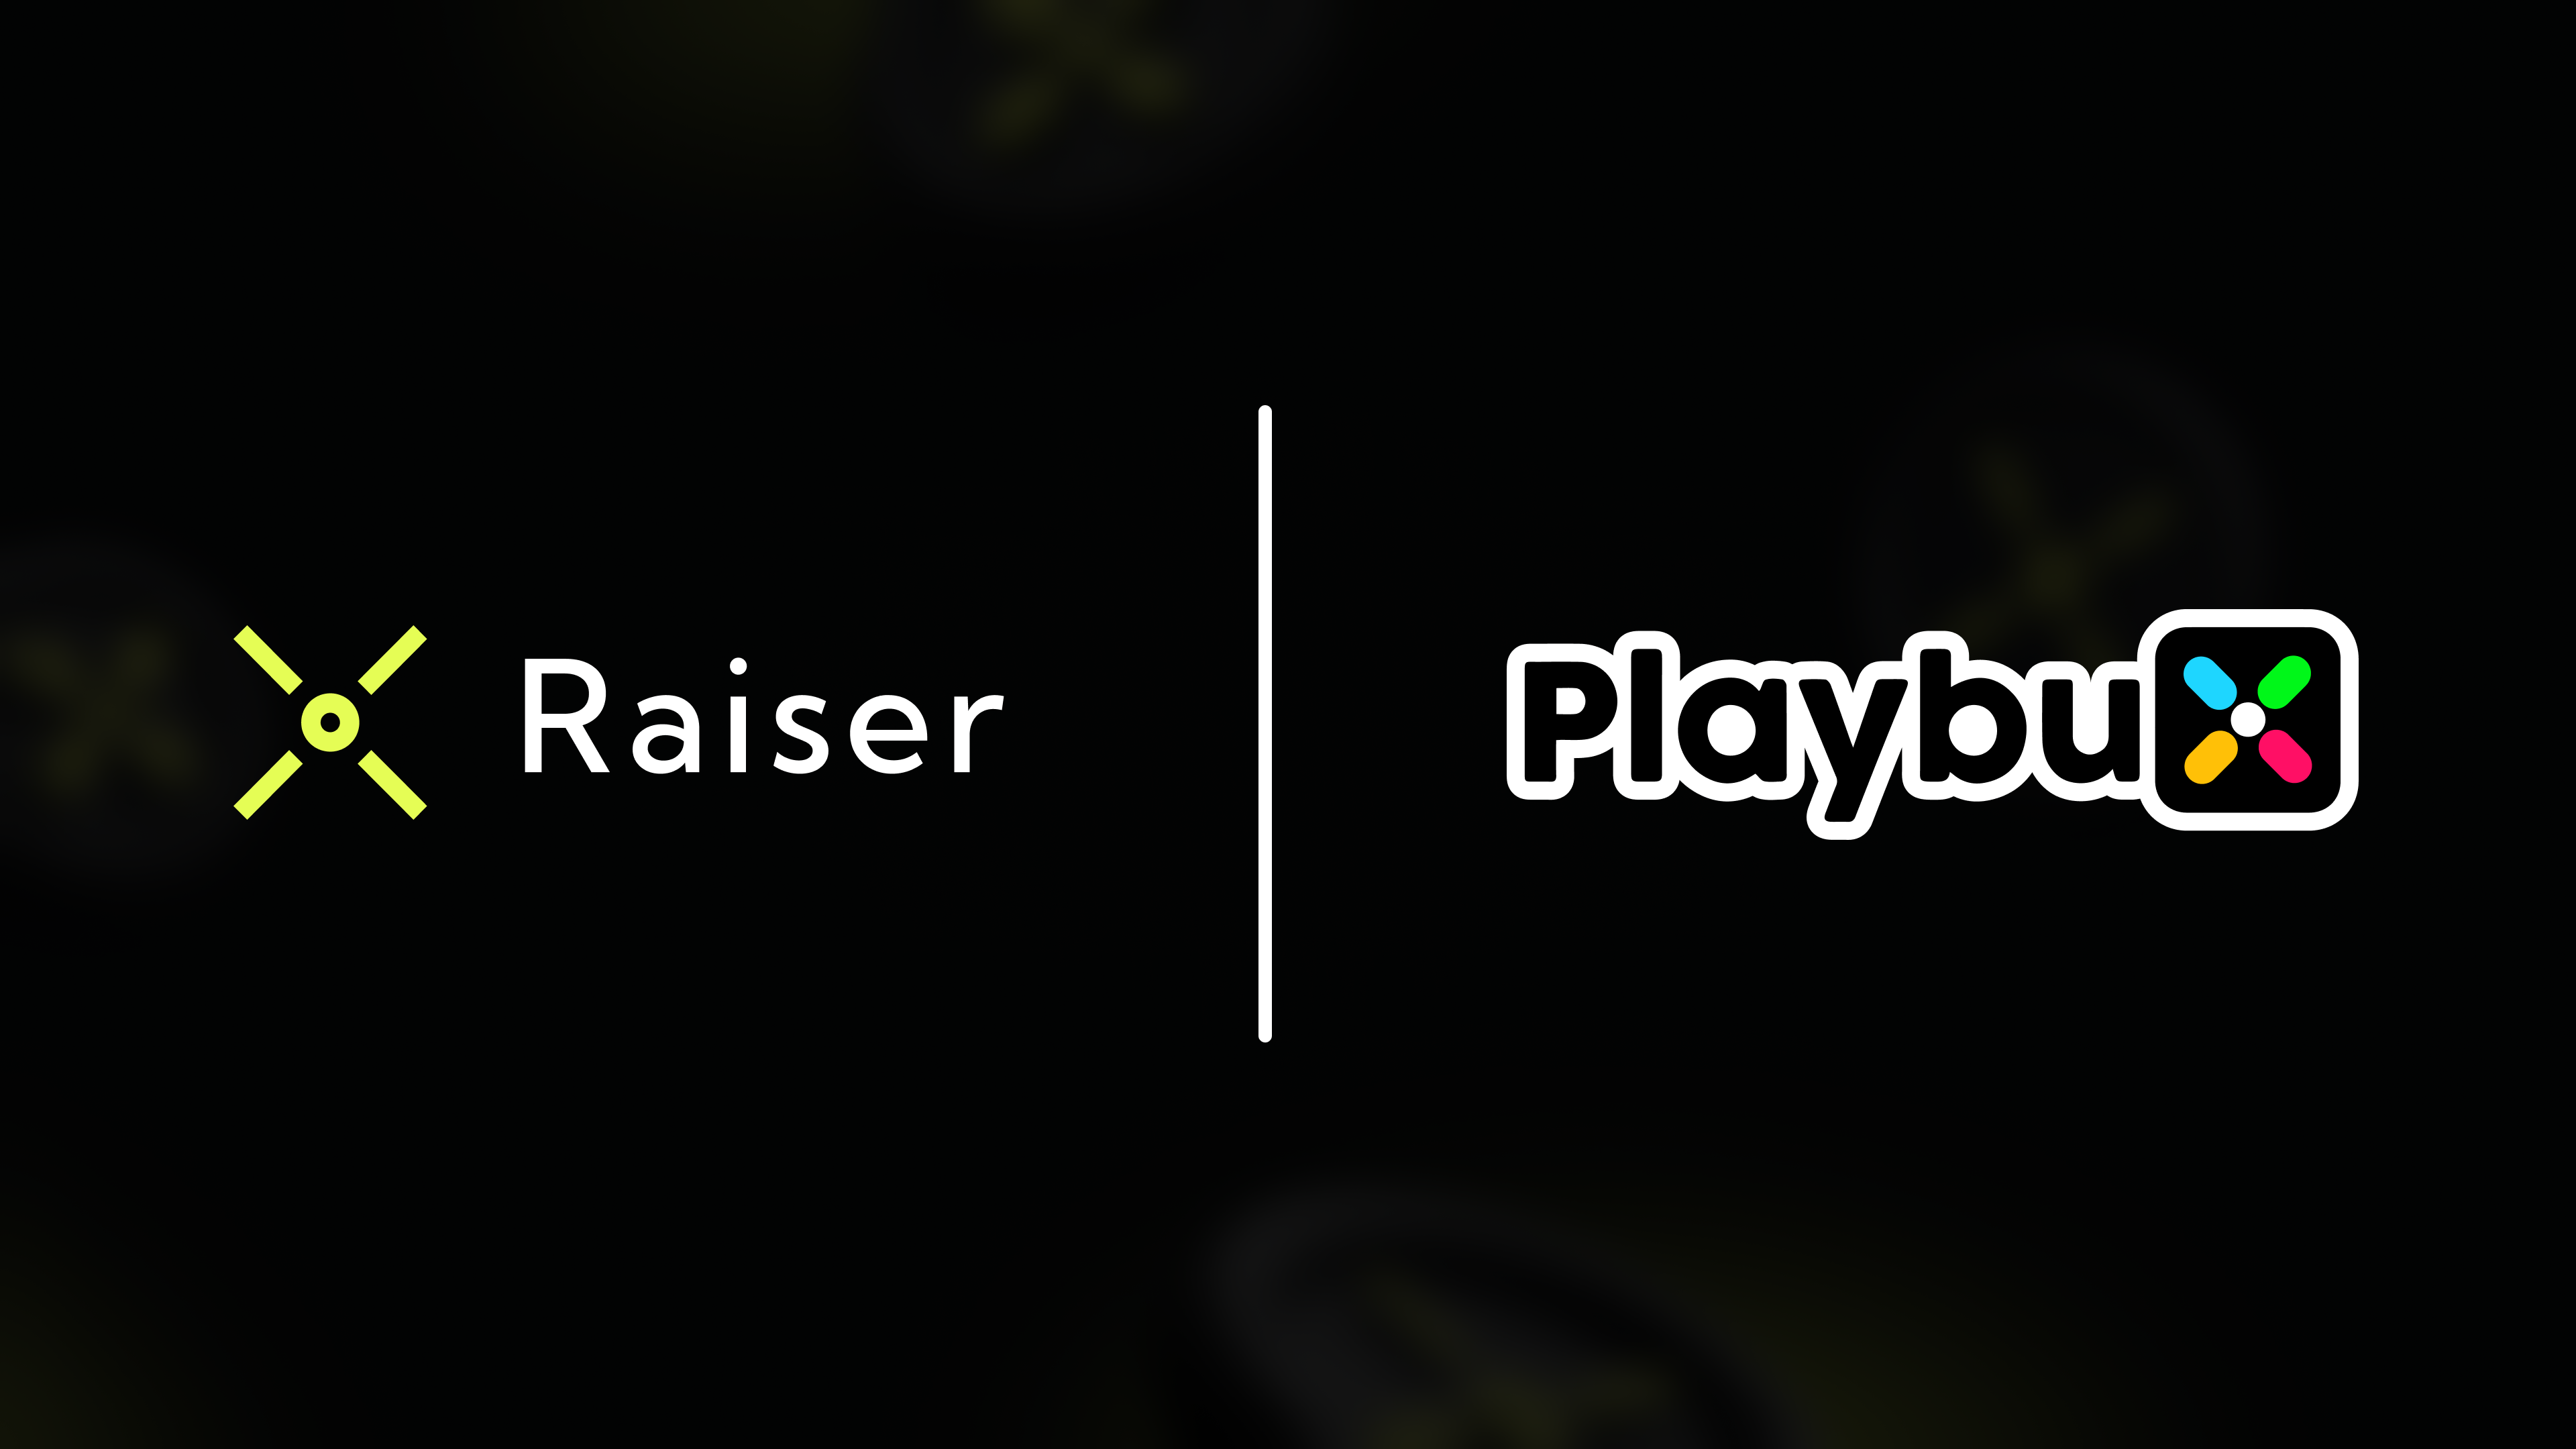 Raiser.co Pioneers Equitable Crypto Investments Playbux Fair Community Offering (FCO) -tarjouksella | Live Bitcoin-uutiset